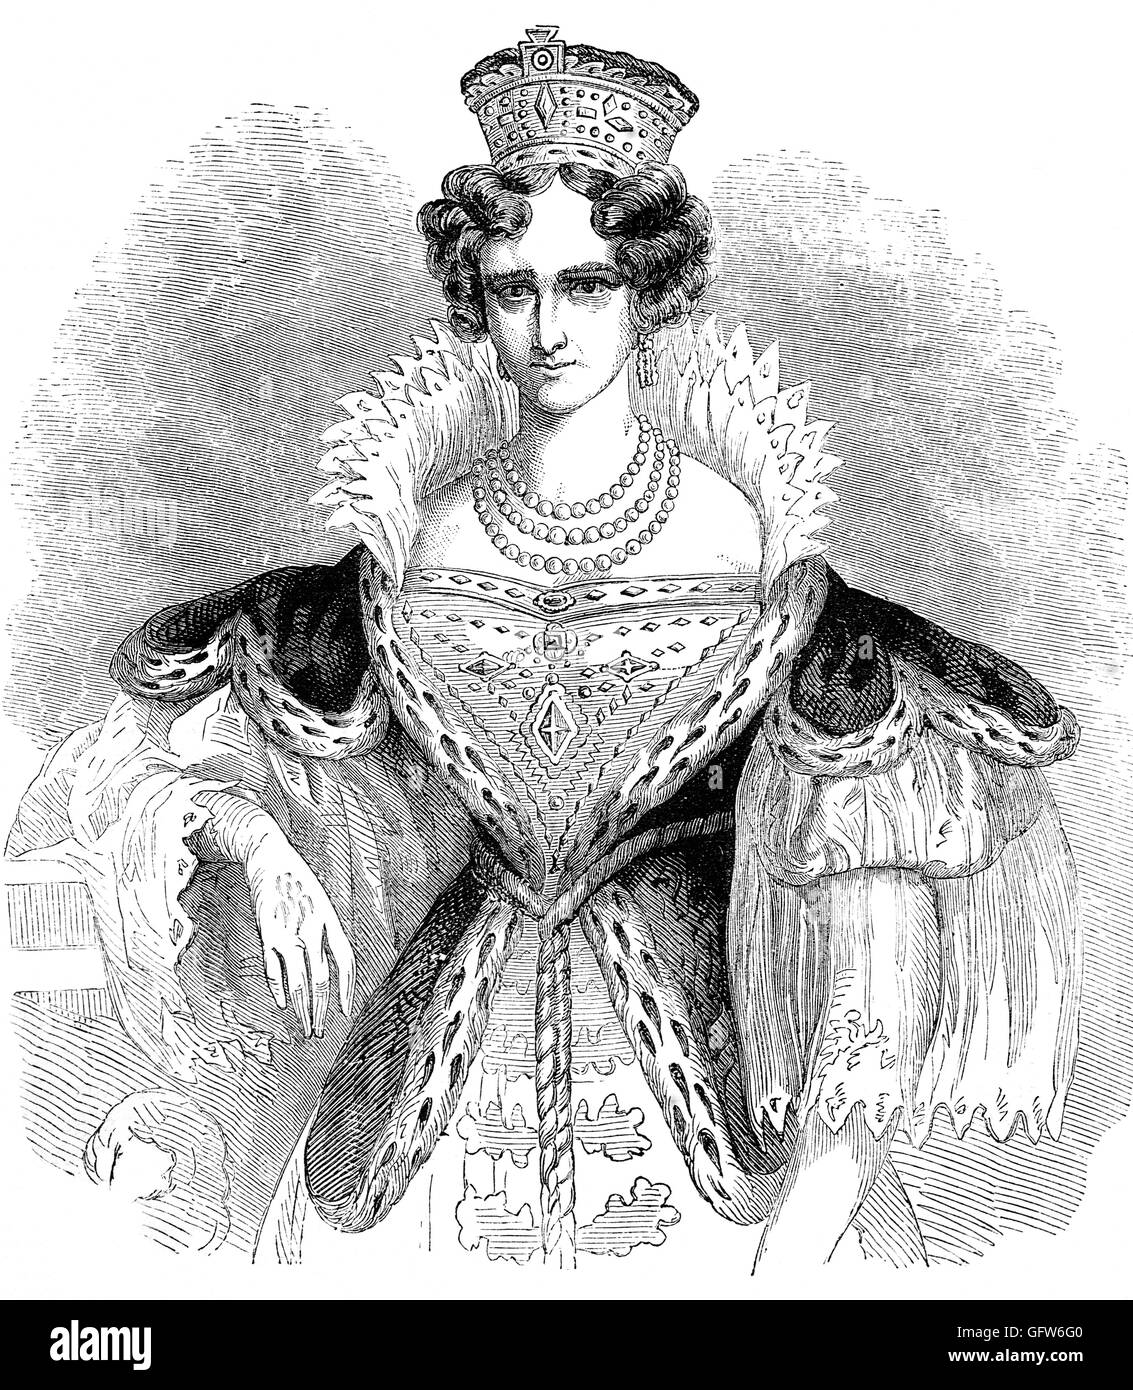 Adelaide of Saxe-Meiningen (1792 – 1849) was the queen consort of the United Kingdom and of Hanover as spouse of William IV of the United Kingdom. Adelaide was the daughter of George I, Duke of Saxe-Meiningen, and Luise Eleonore, daughter of Prince Christian of Hohenlohe-Langenburg. Stock Photo